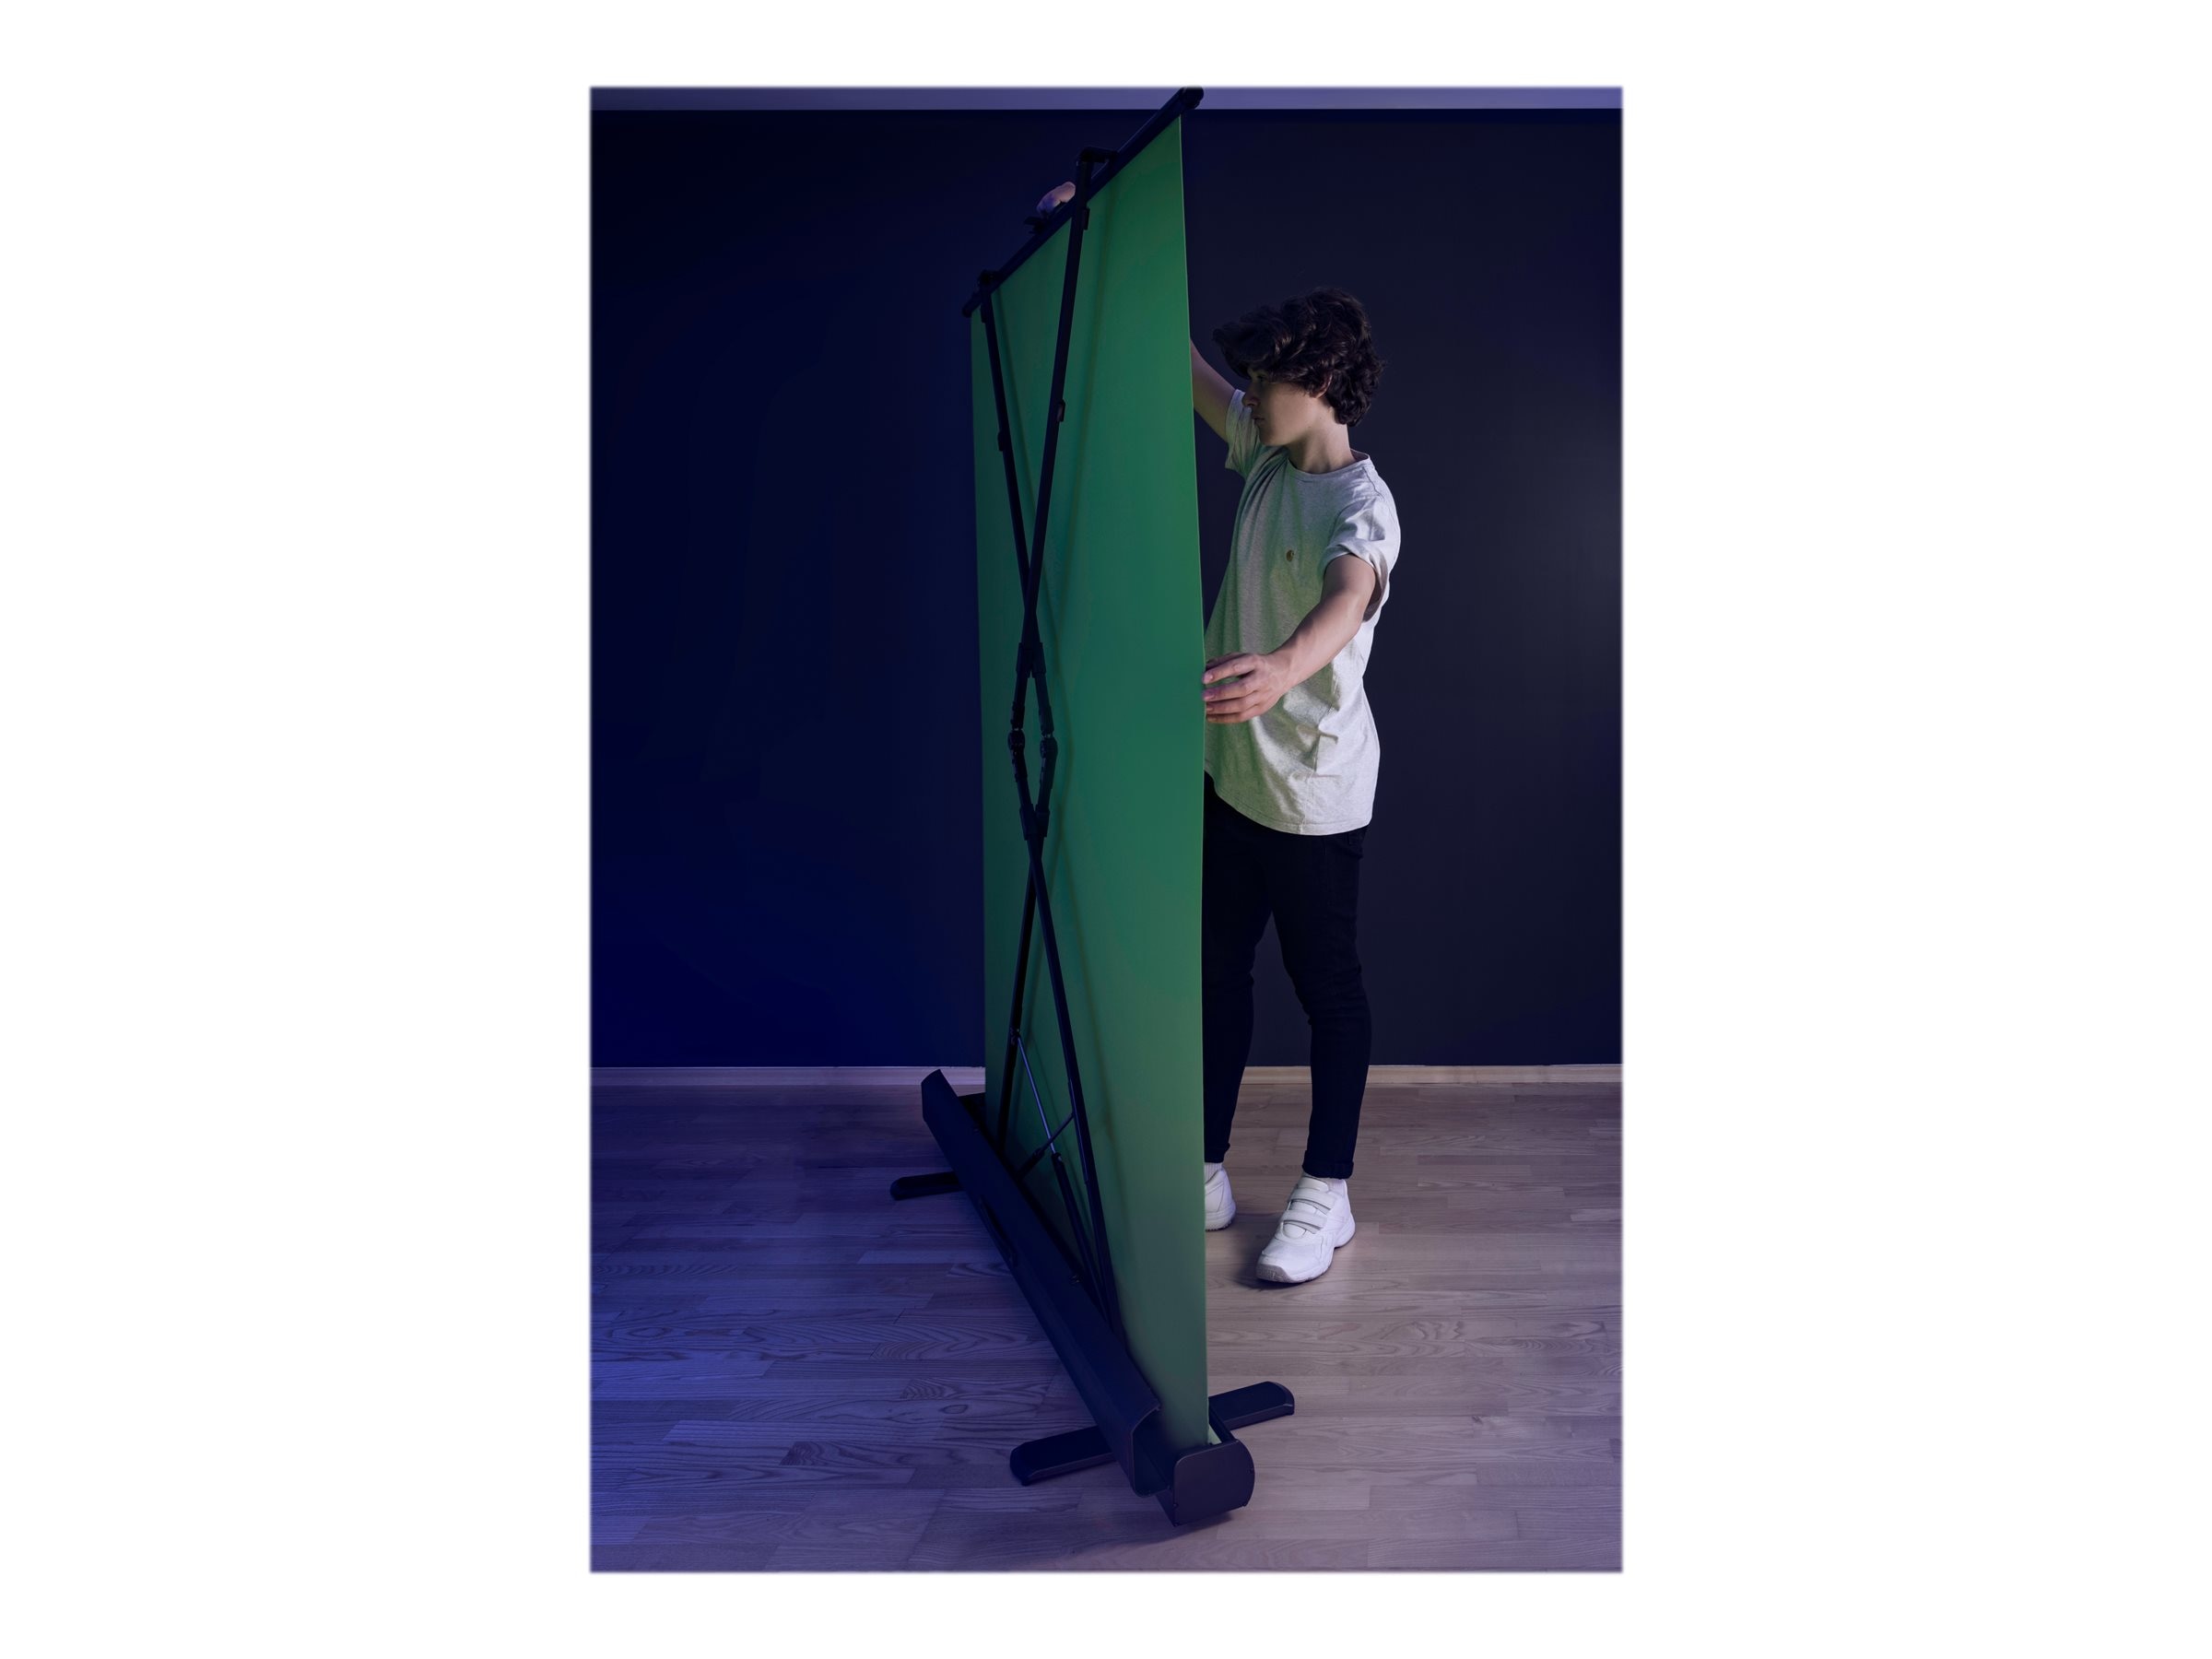 Corsair Green Screen Set the Stage for ACCSTRULY Immersive (10GAF9901)